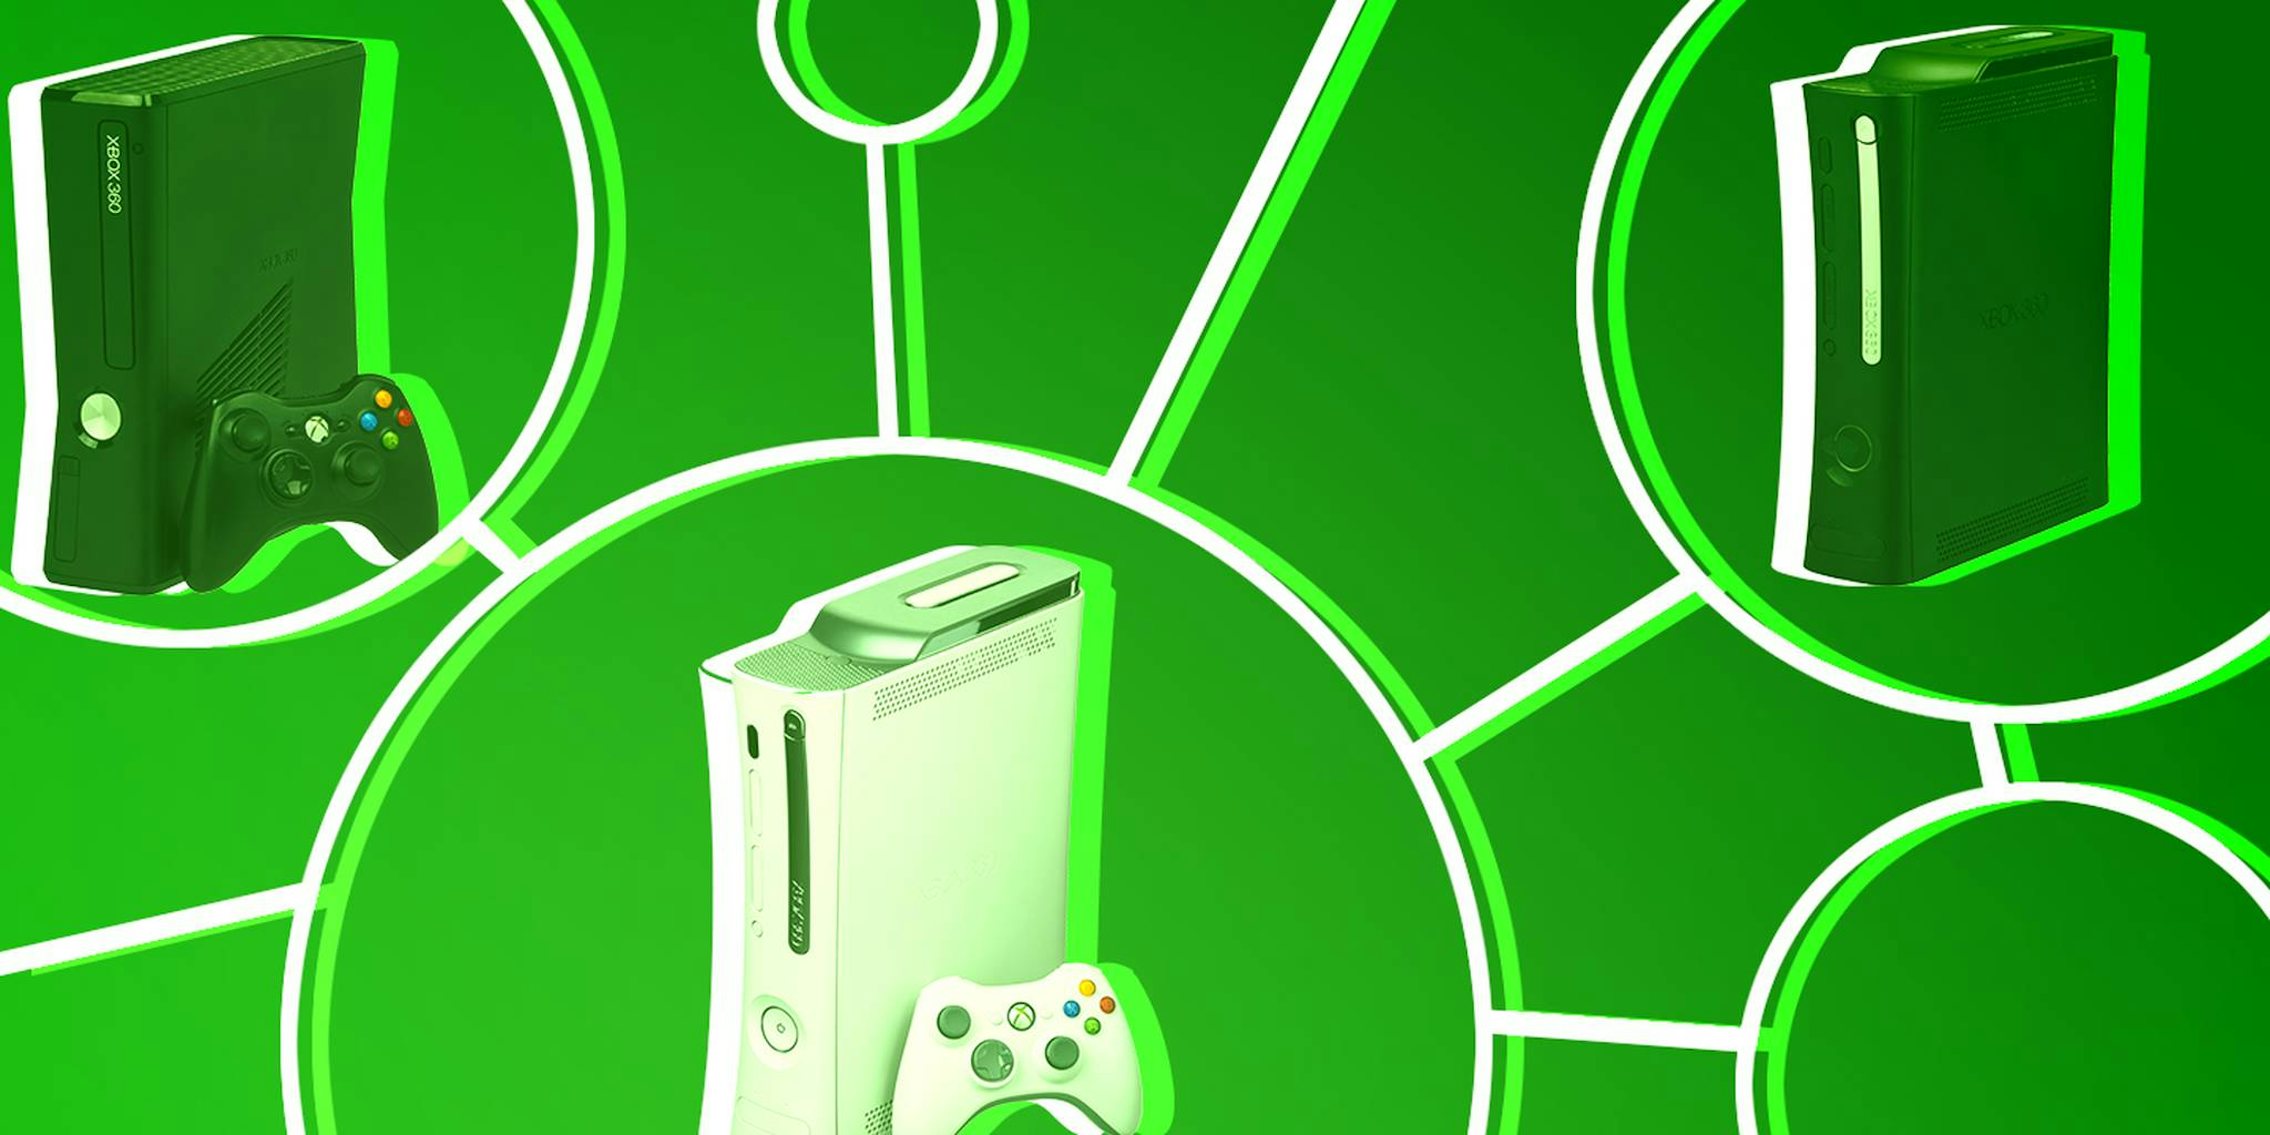 Phil Spencer signals Xbox One hardware upgrades - Polygon